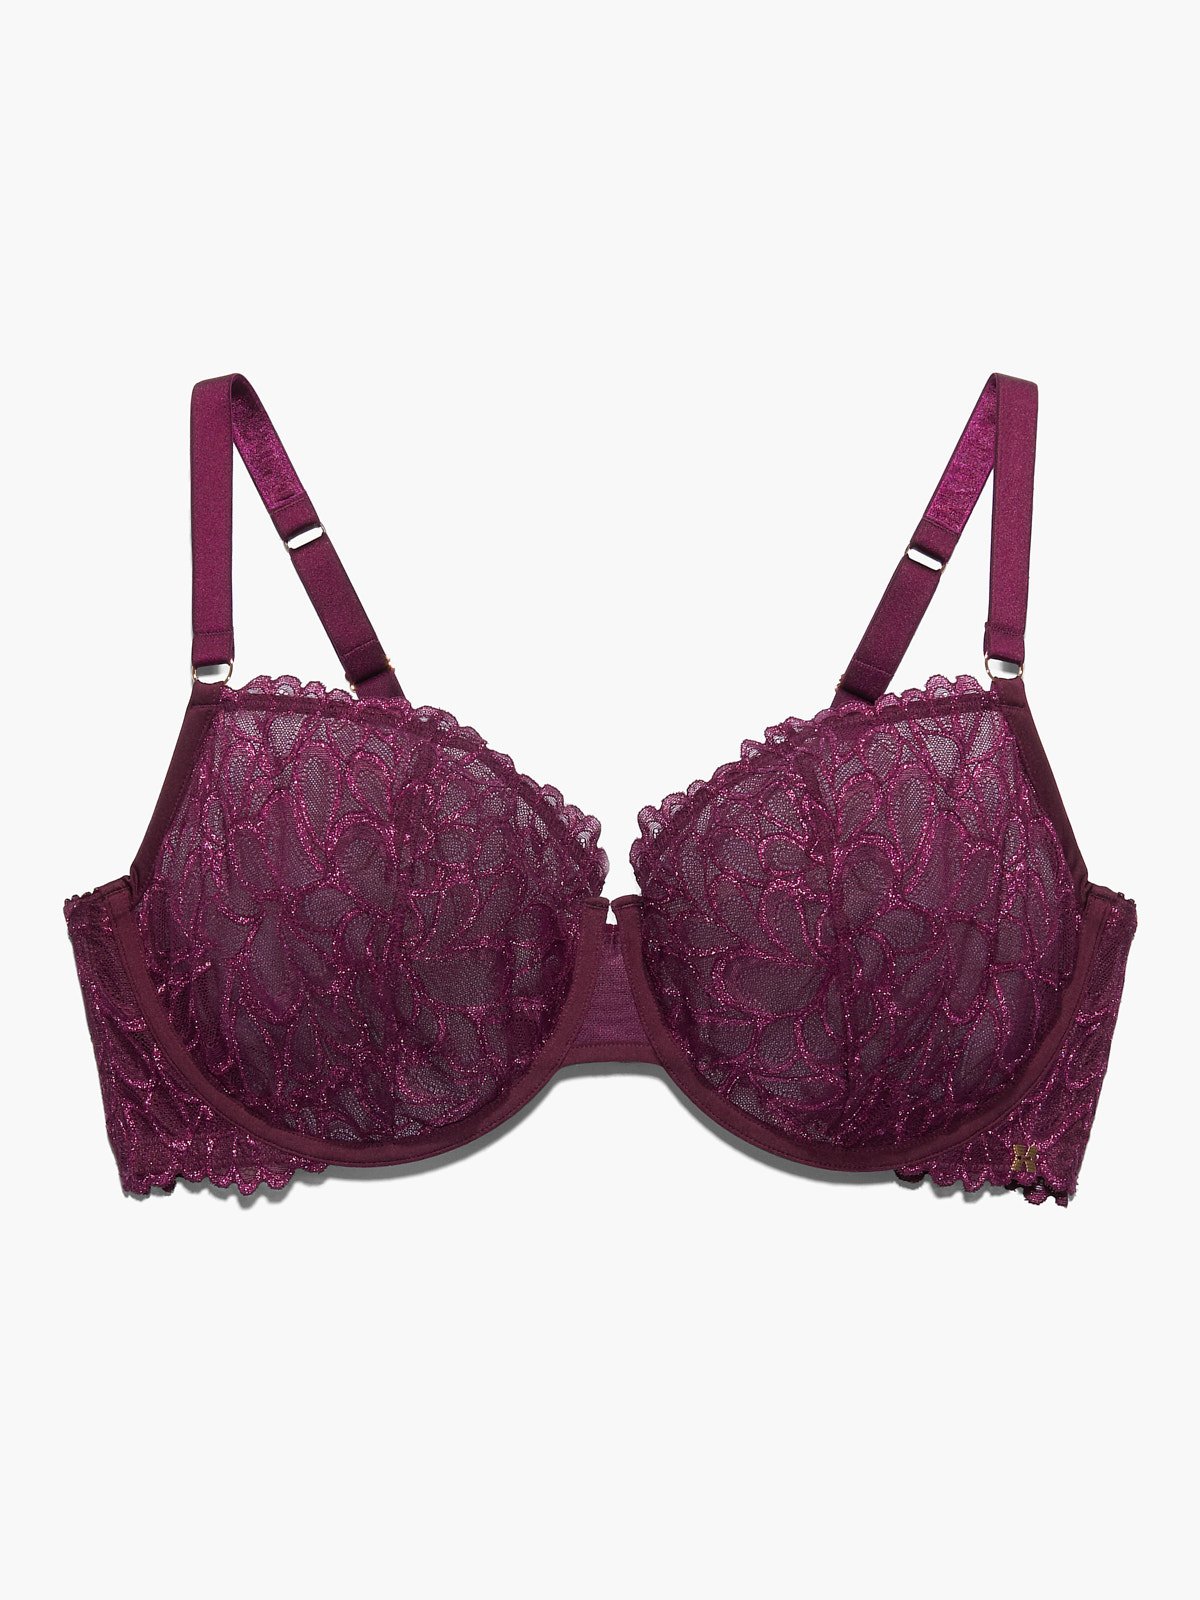 https://cdn.savagex.com/media/images/products/BA2042991-5179/SAVAGE-NOT-SORRY-UNLINED-LACE-BALCONETTE-BRA-BA2042991-5179-LAYDOWN-1200x1600.jpg